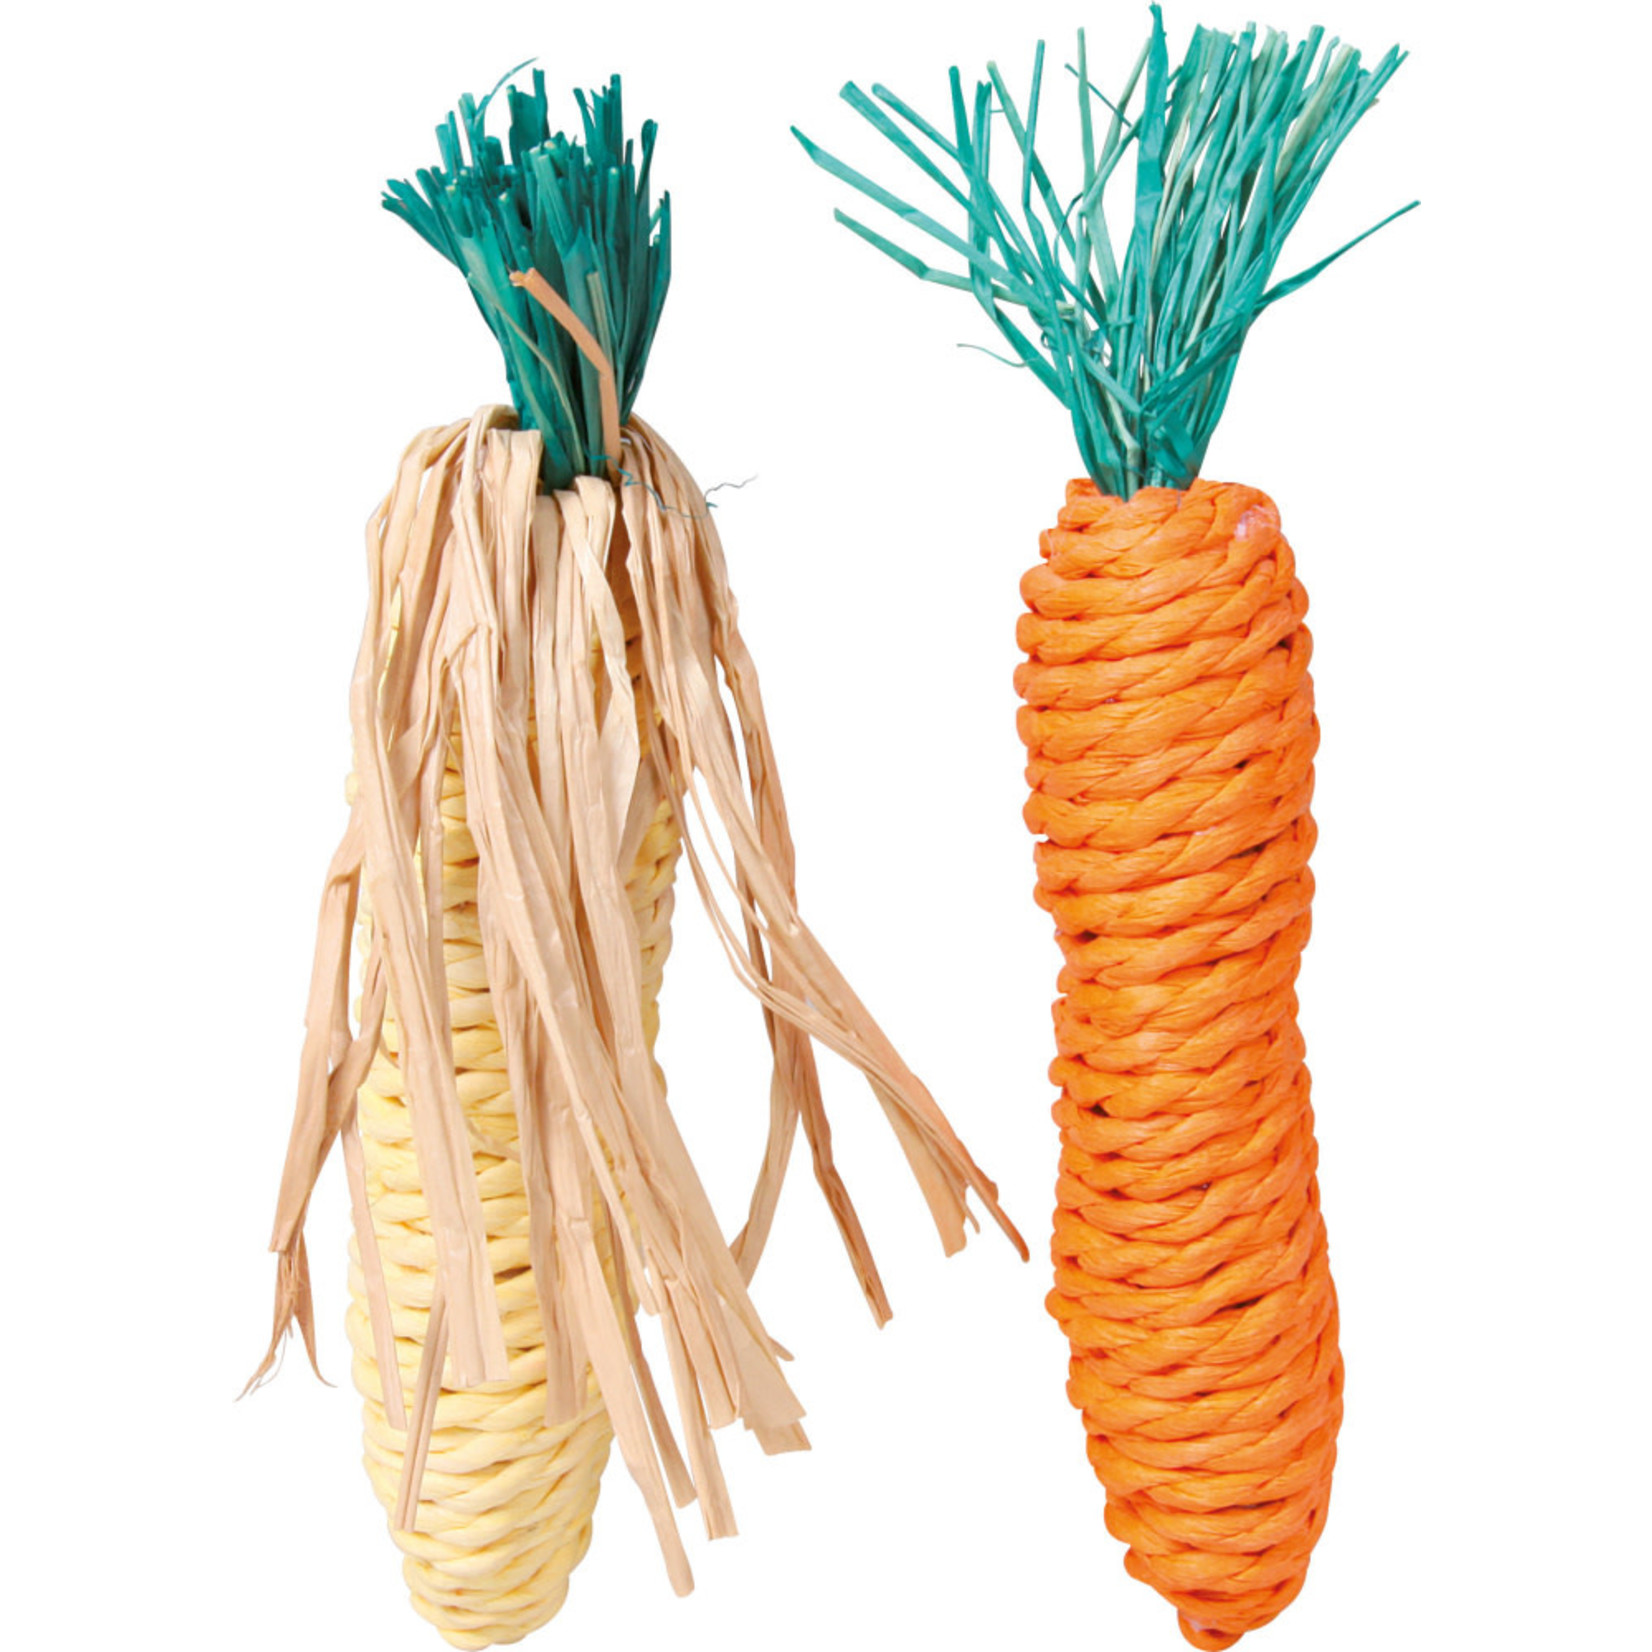 Trixie Sisal Carrot and Corn Small Animal Toy, 15cm